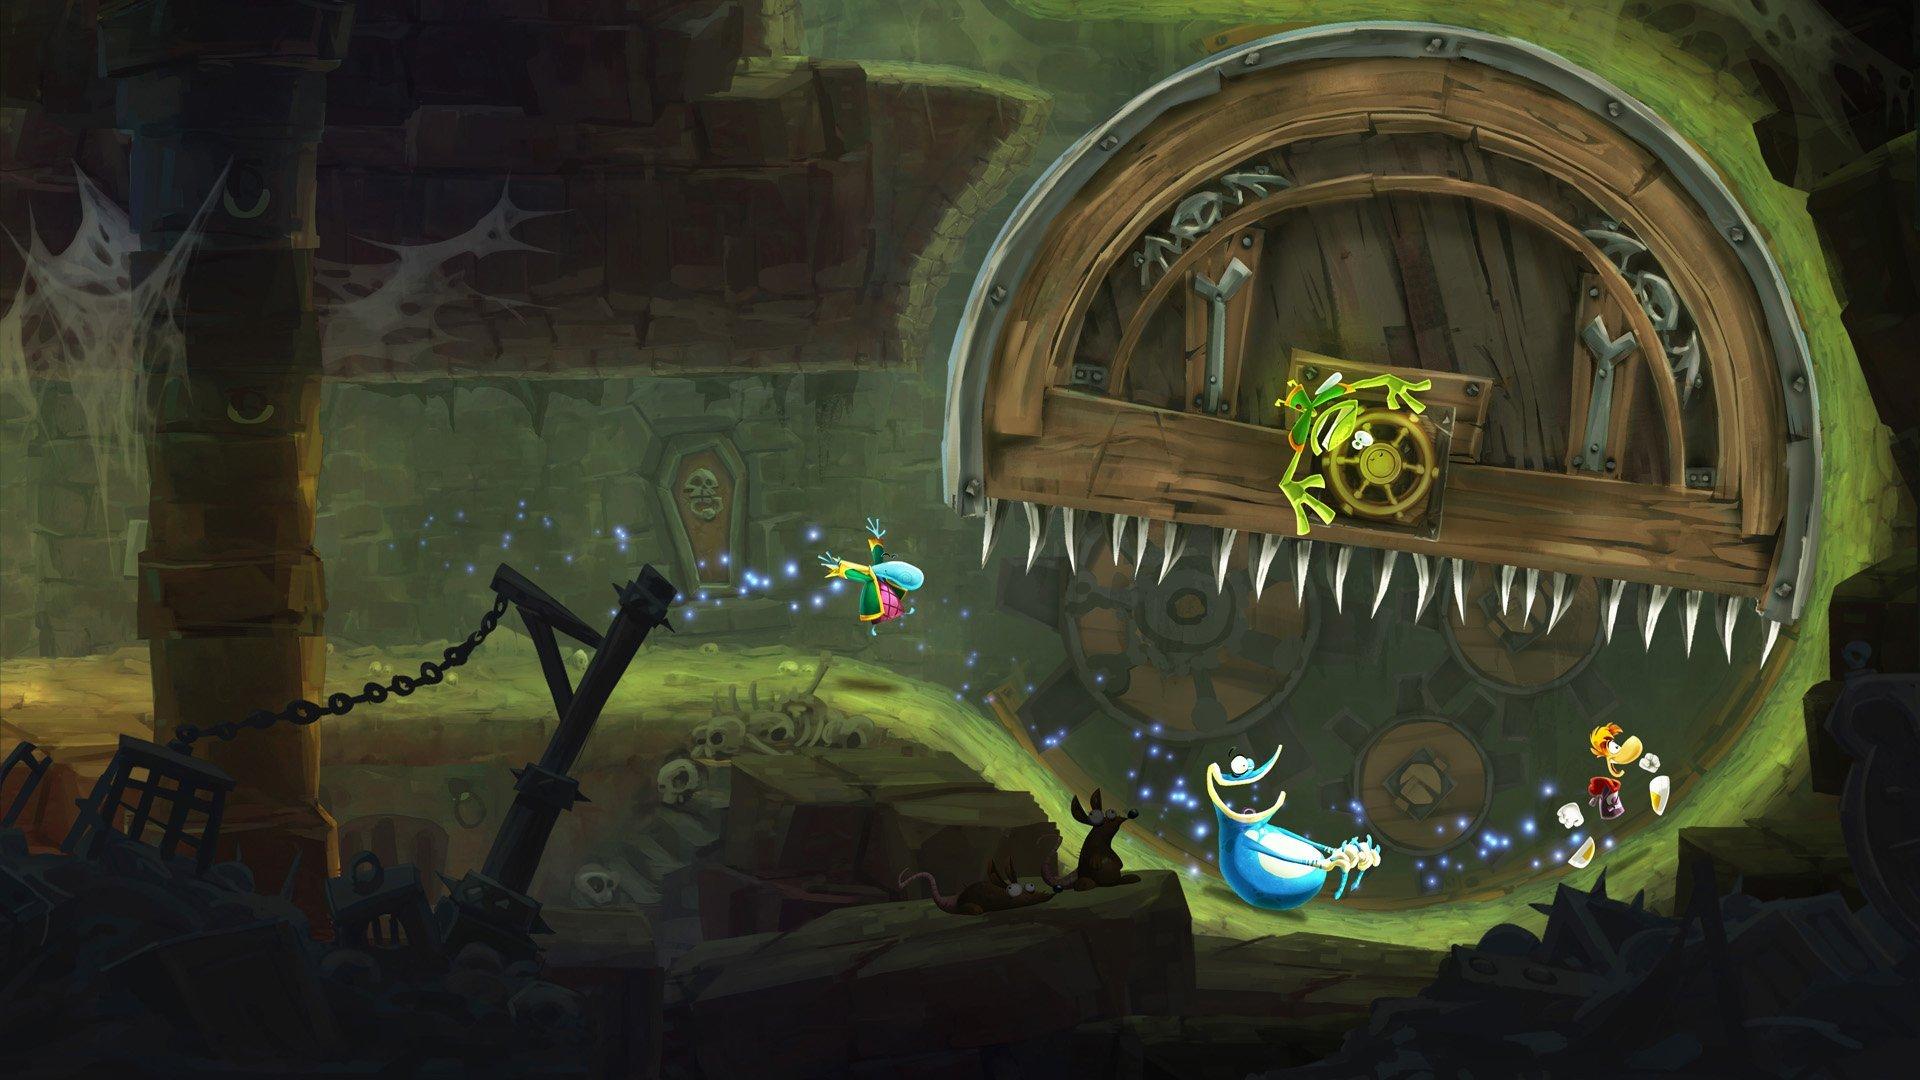 Rayman Legends review for PS4, Xbox One - Gaming Age